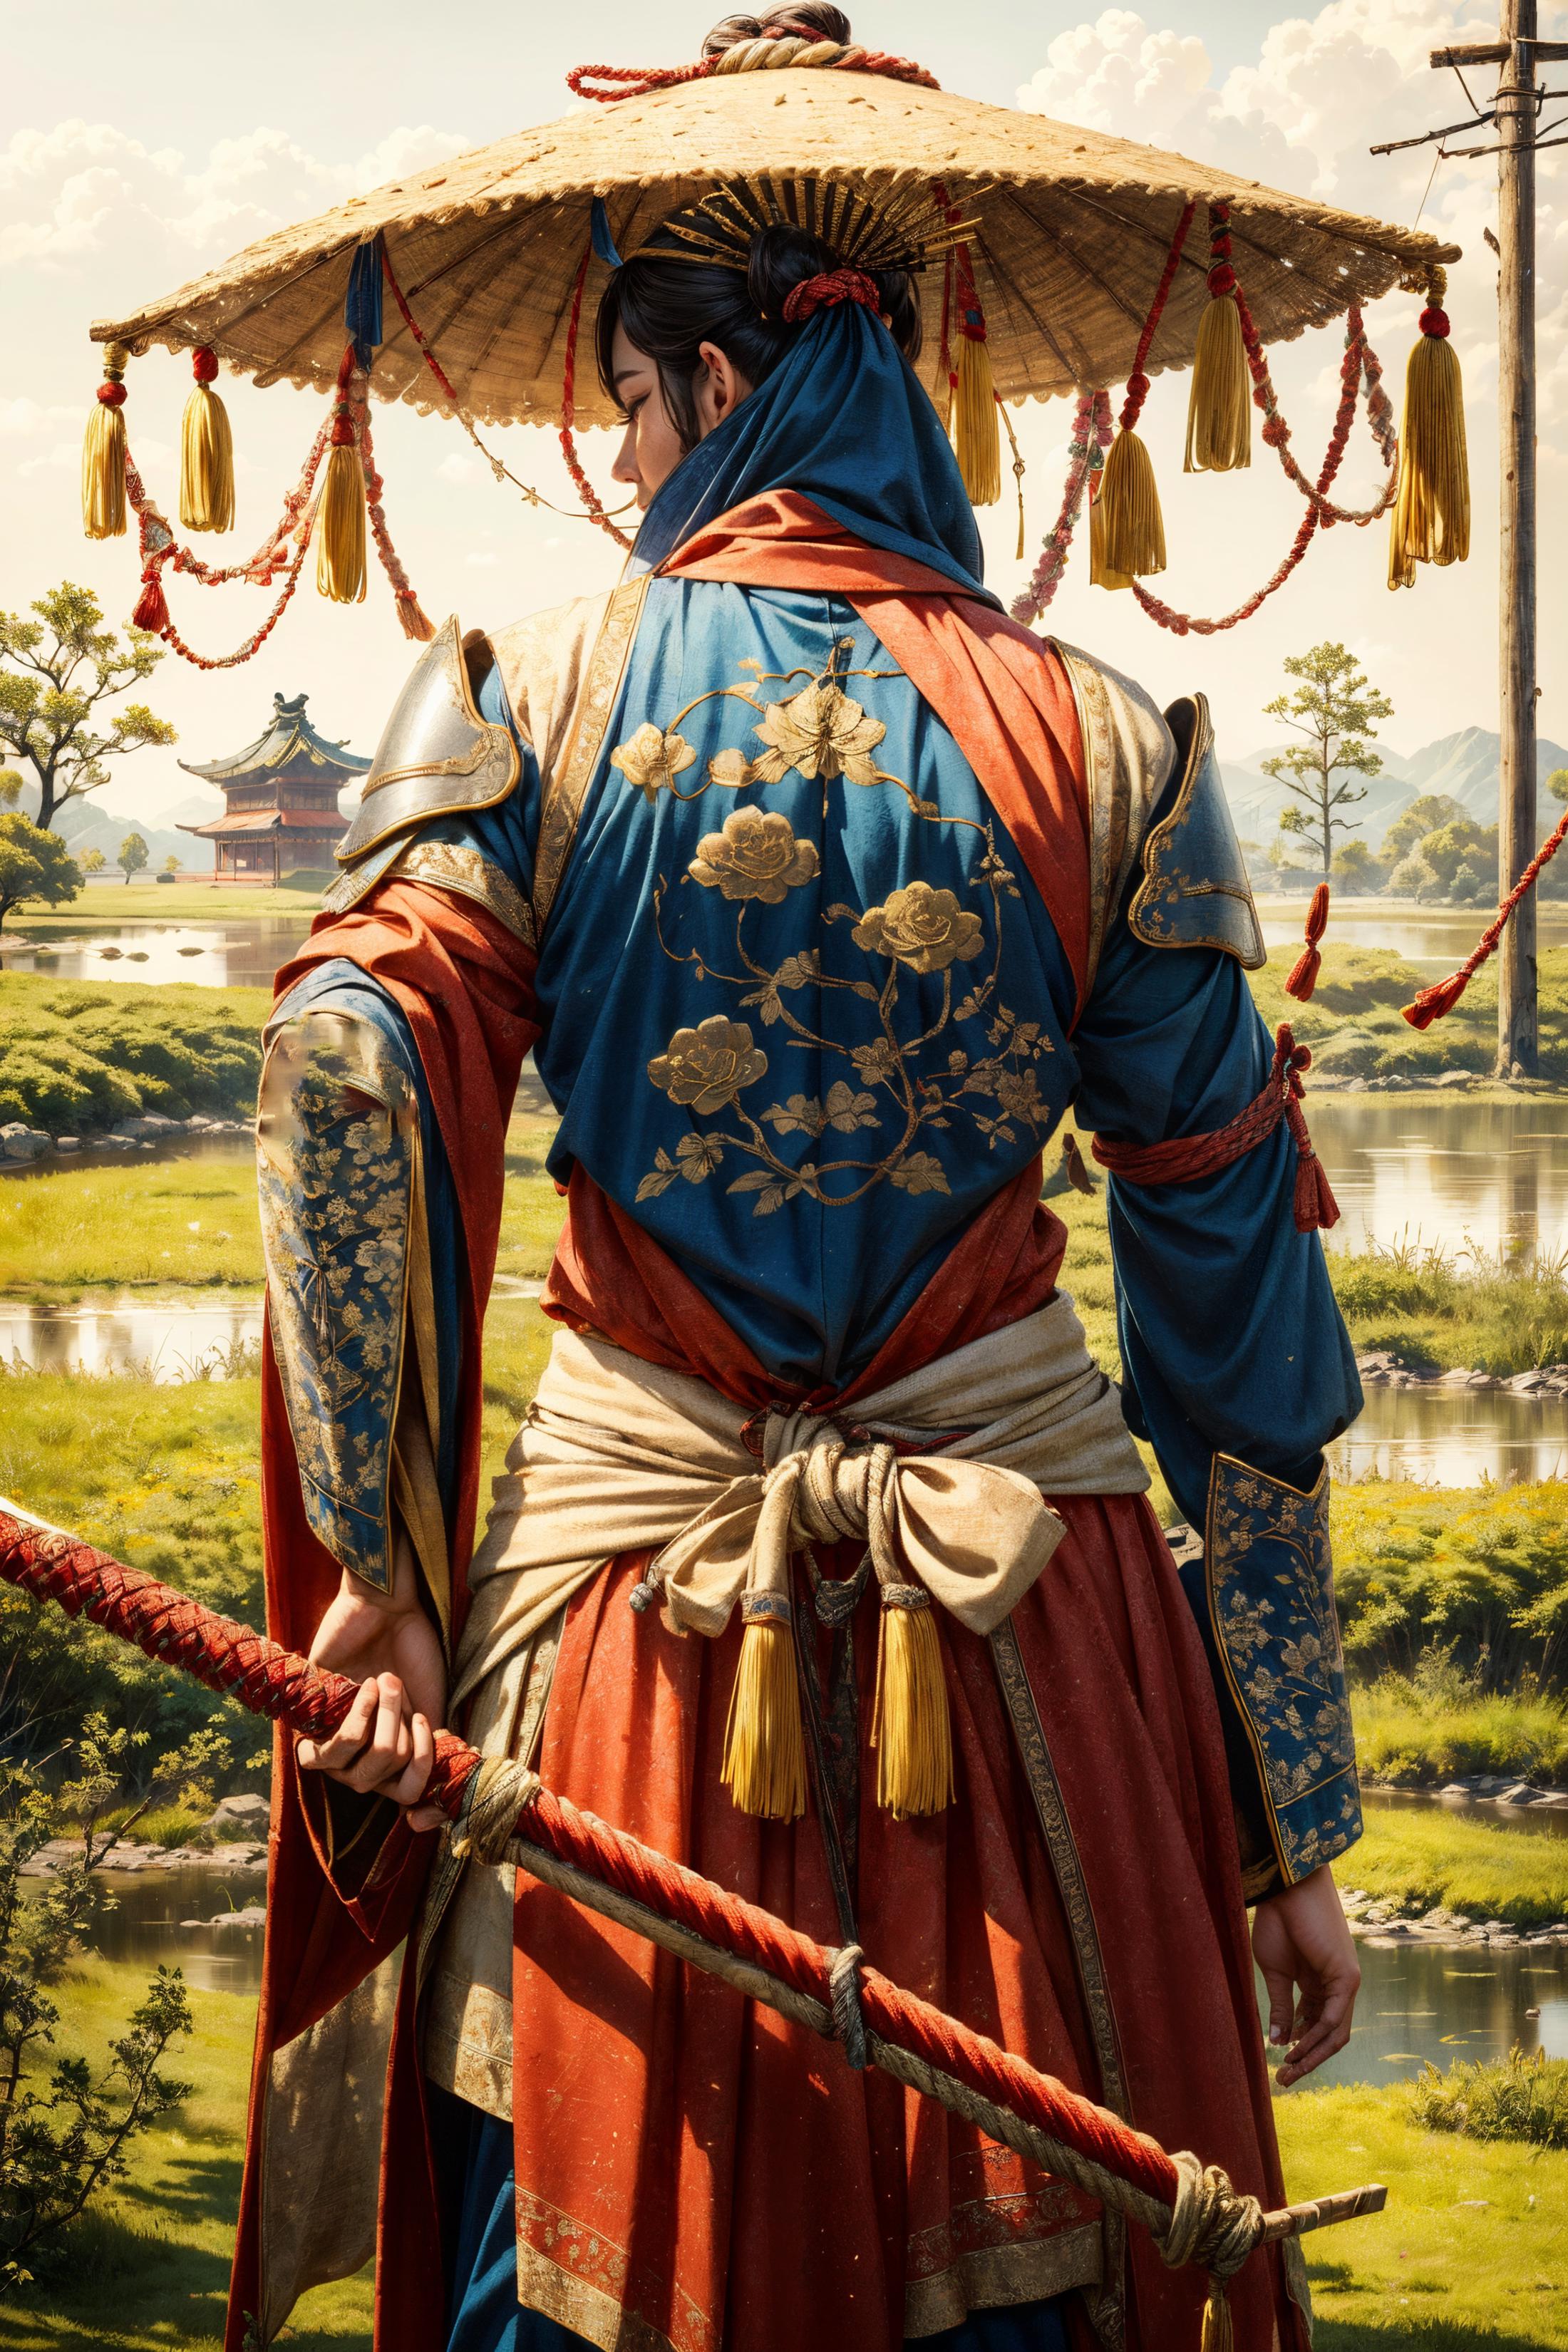 A person wearing a blue and red outfit, holding a red rope.